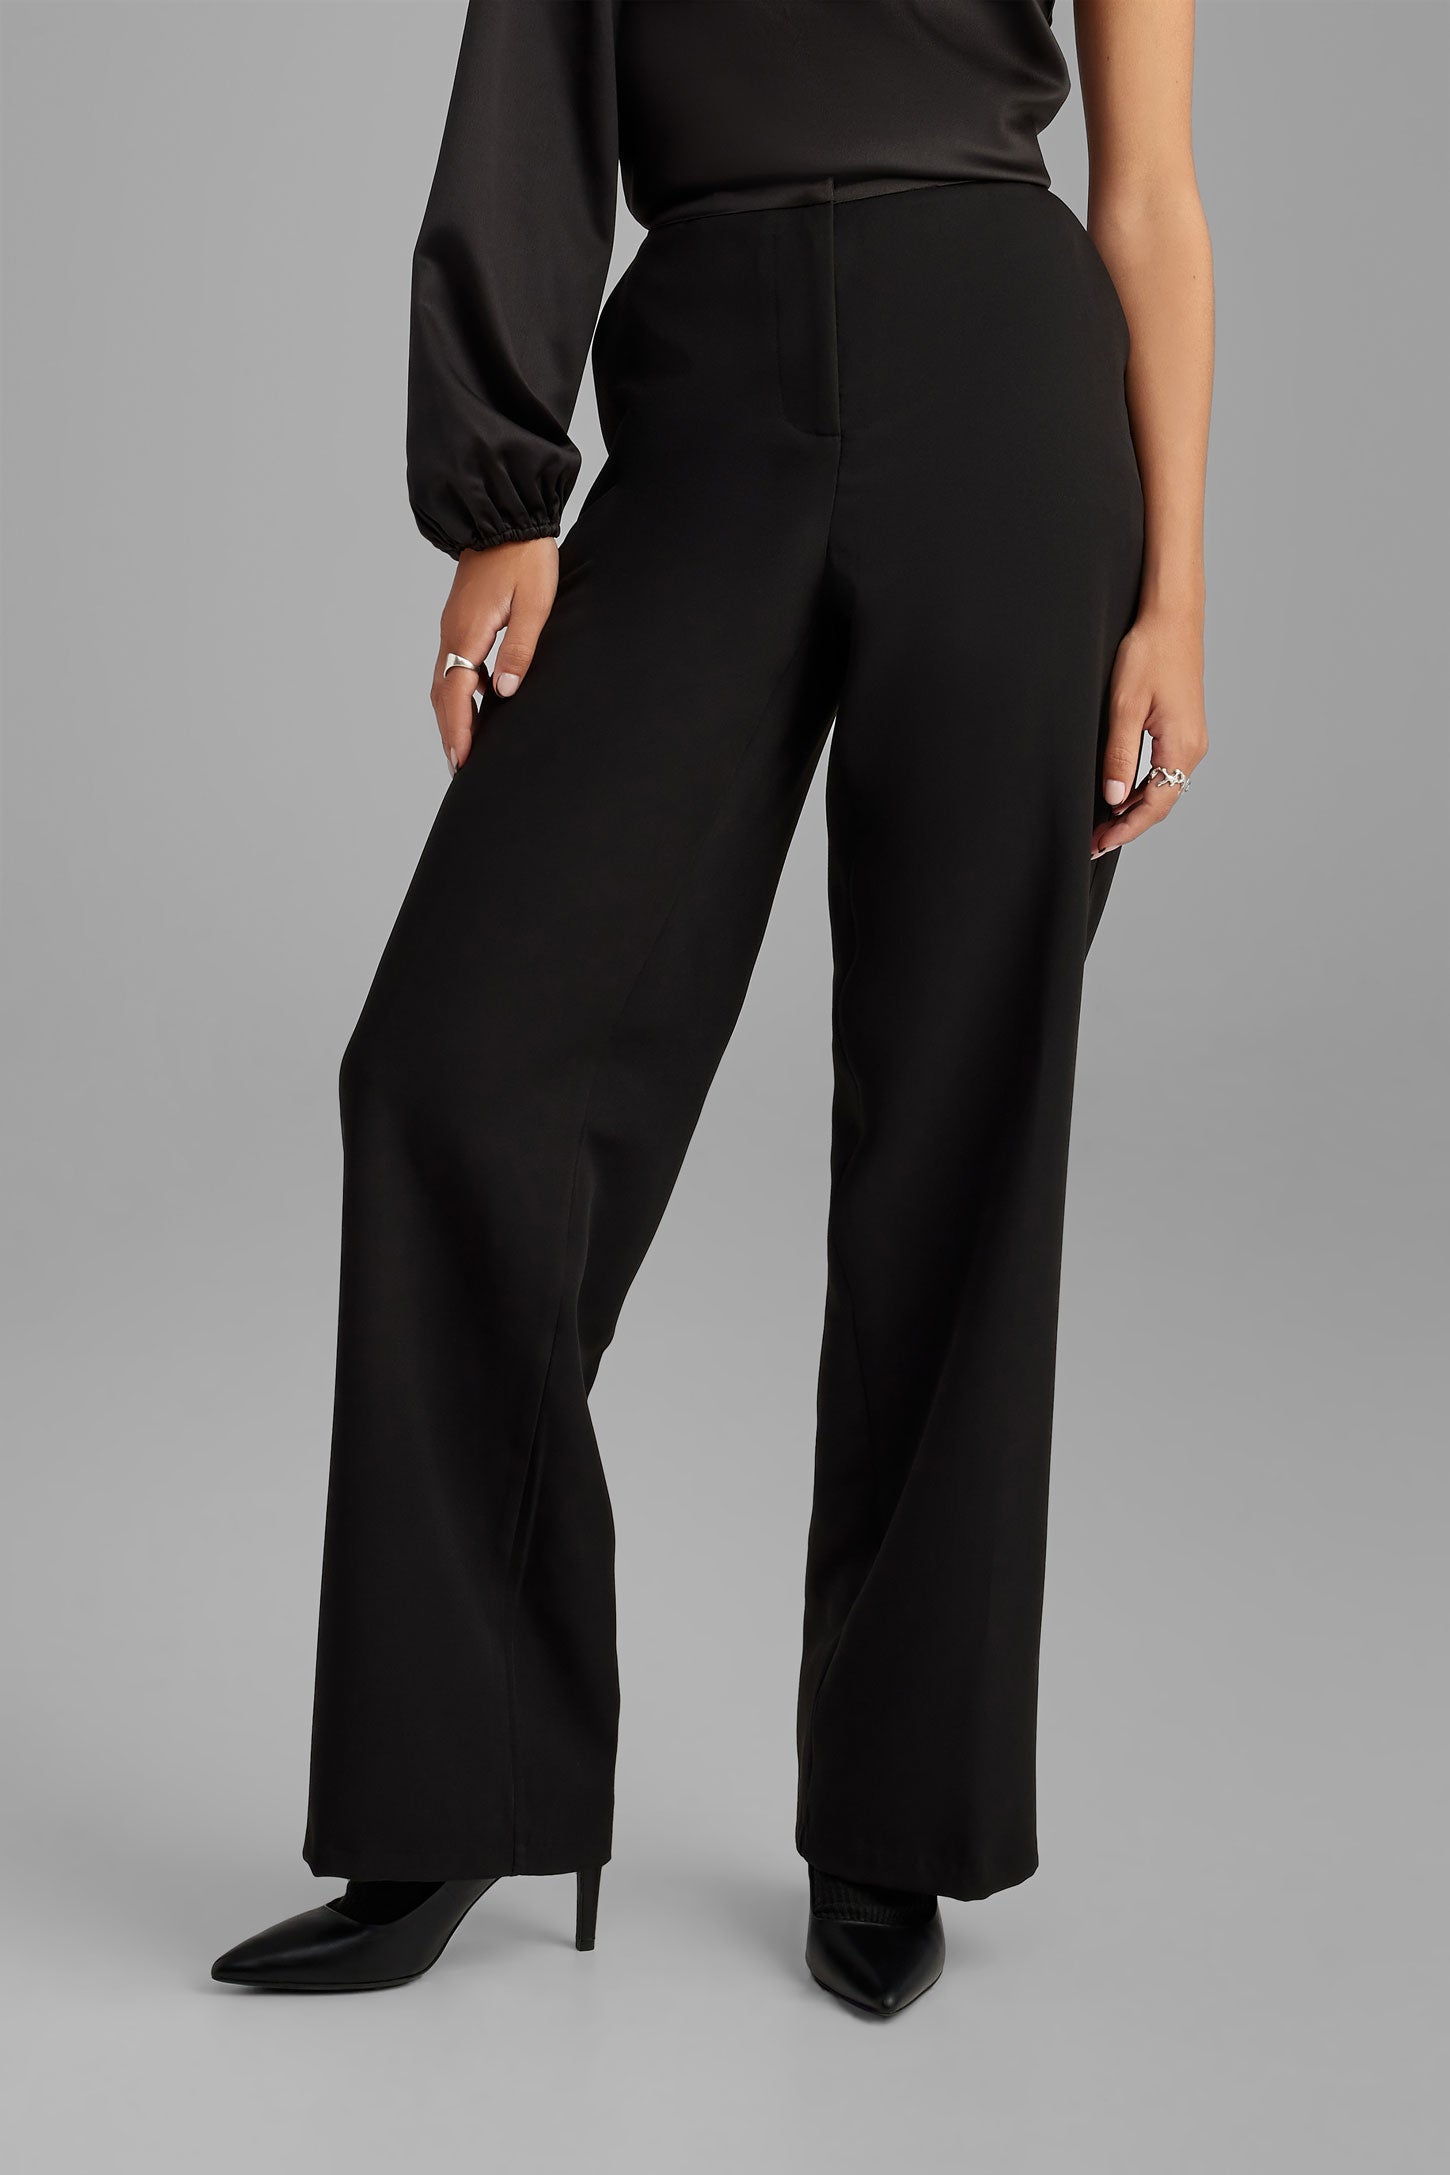 High Waisted Tapered Trousers, Black Dressy Tuxedo Pants for Ladies, Pants  for Women Suit, Elegant Slim Leg Formal Pants, Tailored Pants -  Norway